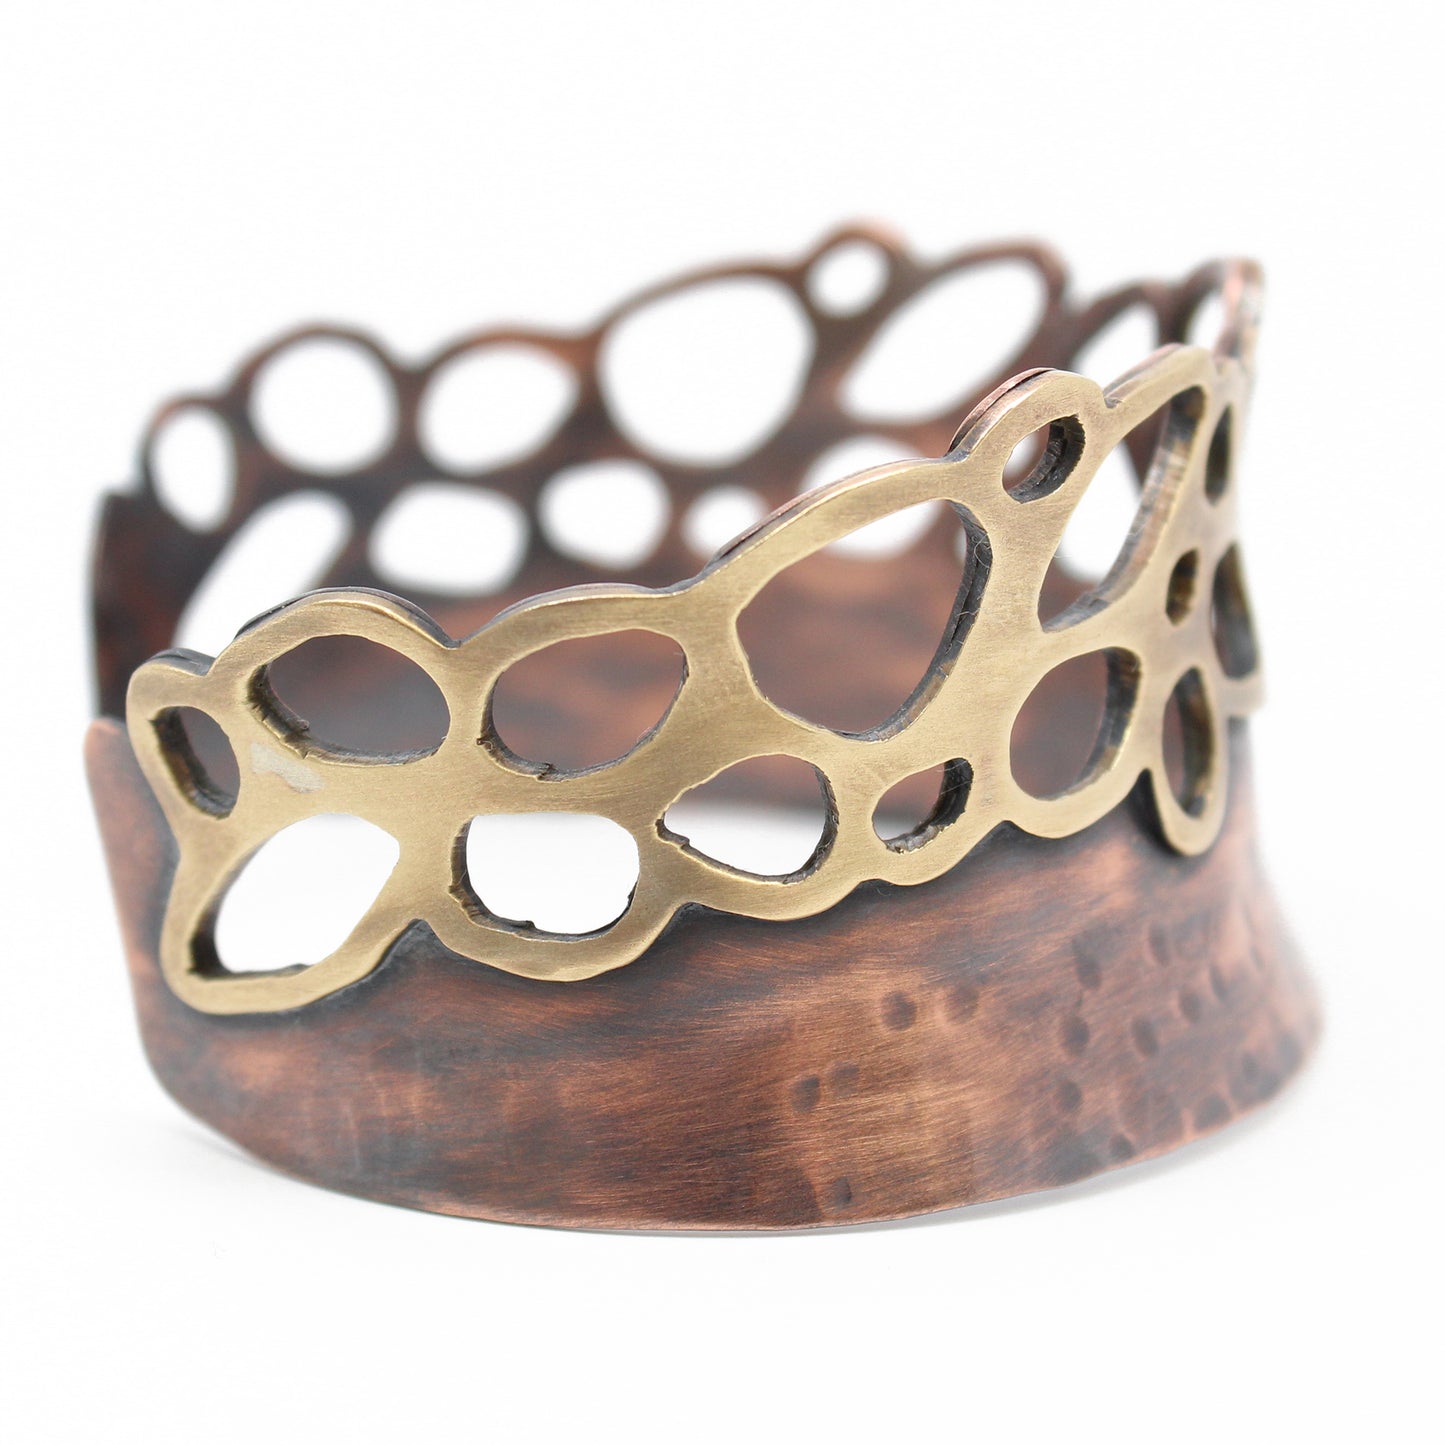 Load image into Gallery viewer, Wide Copper Cuff Bracelet with Brass Accents
